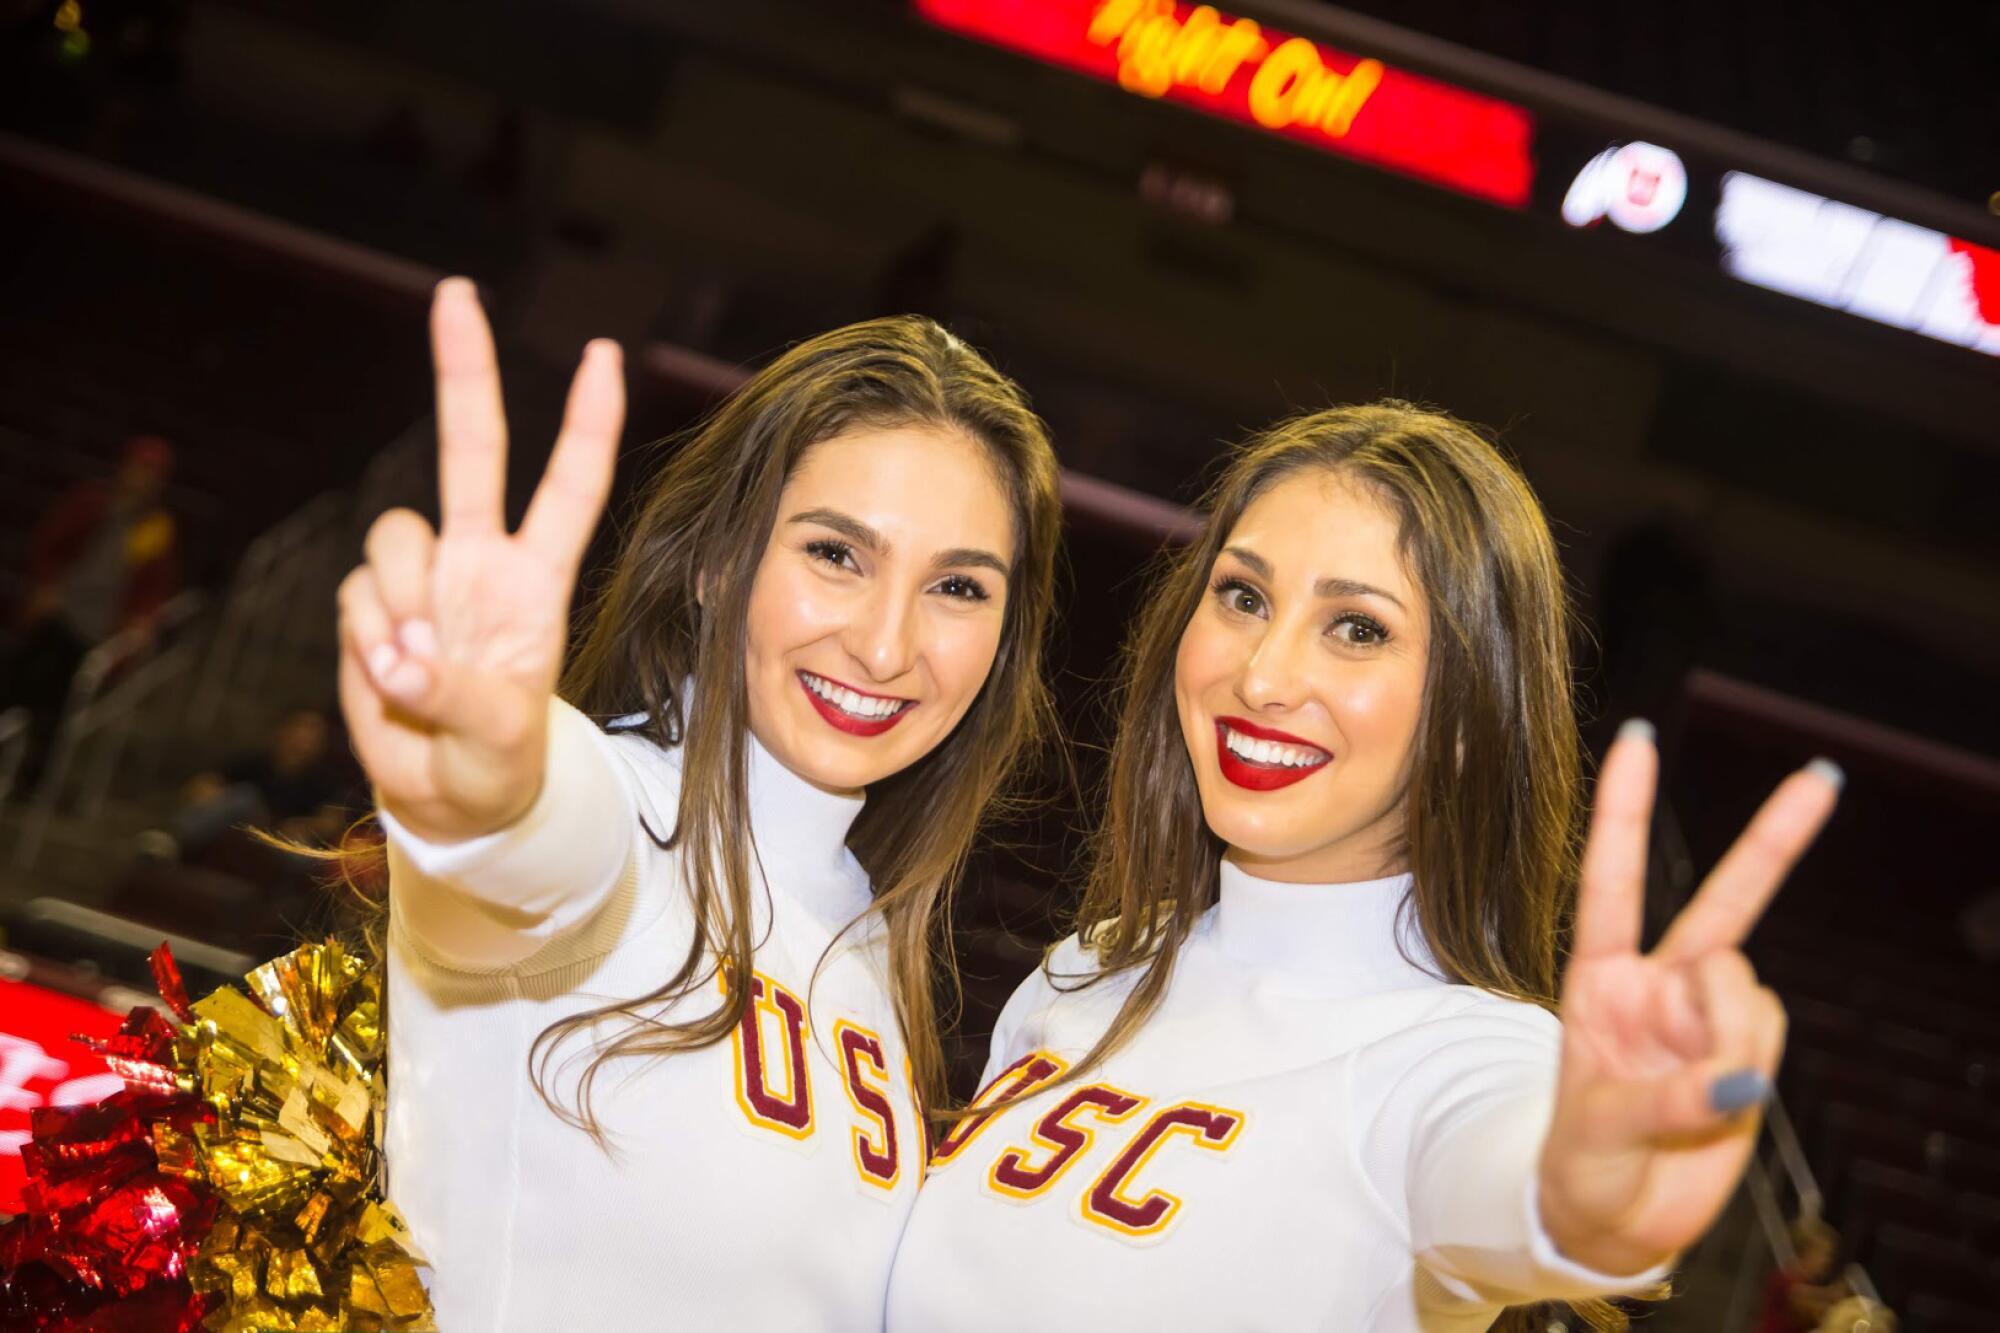 Song Girls Bella, left, and Adrianna Robakowski flash victory signs.